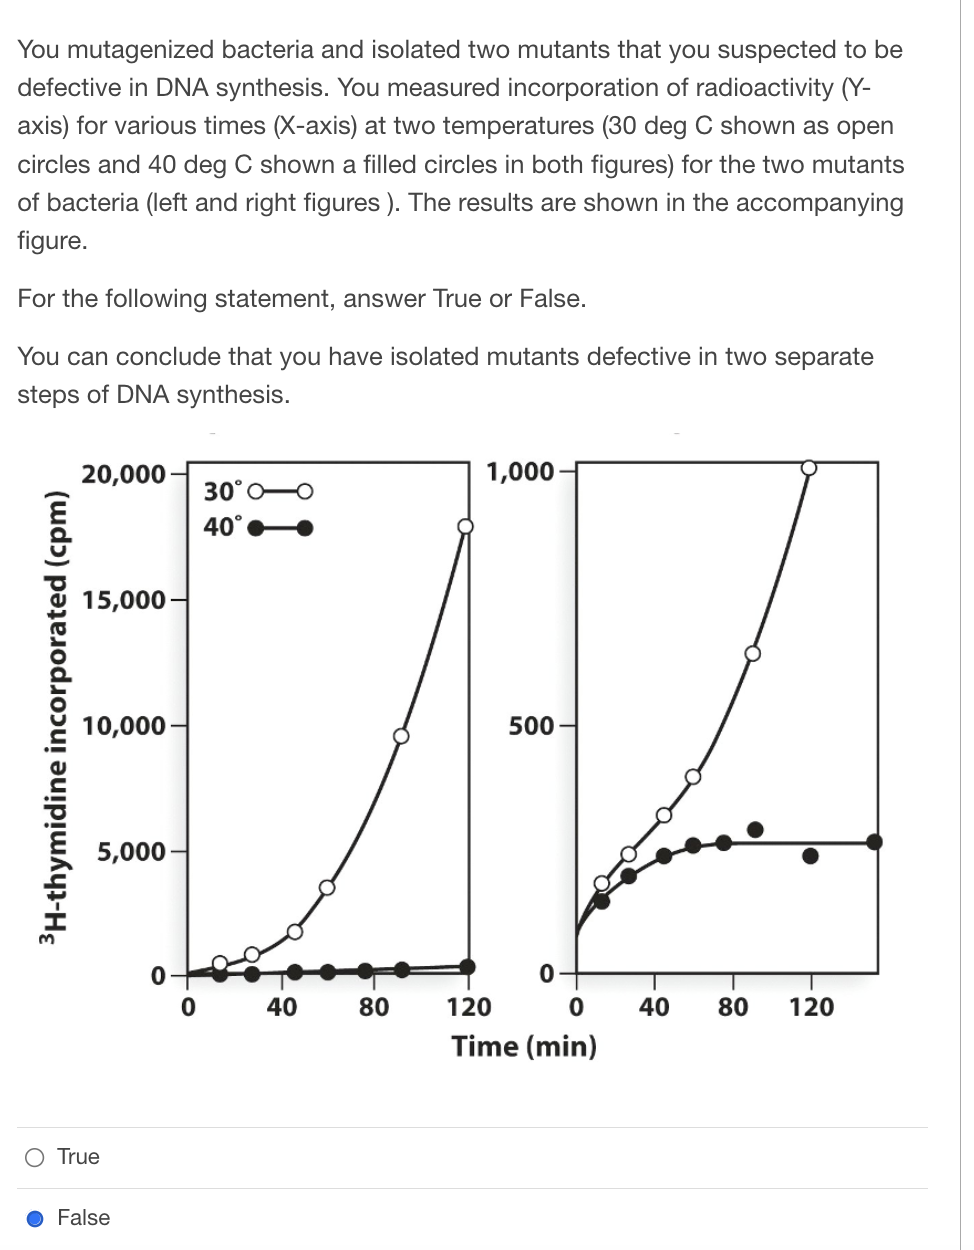 You mutagenized bacteria and isolated two mutants that you suspected to be
defective in DNA synthesis. You measured incorporation of radioactivity (Y-
axis) for various times (X-axis) at two temperatures (30 deg C shown as open
circles and 40 deg C shown a filled circles in both figures) for the two mutants
of bacteria (left and right figures). The results are shown in the accompanying
figure.
For the following statement, answer True or False.
You can conclude that you have isolated mutants defective in two separate
steps of DNA synthesis.
20,000
1,000
30°O
40°
15,000-
10,000-
500
5,000-
0
120
0
Time (min)
³H-thymidine incorporated (cpm)
O True
● False
0
40
80
40 80 120